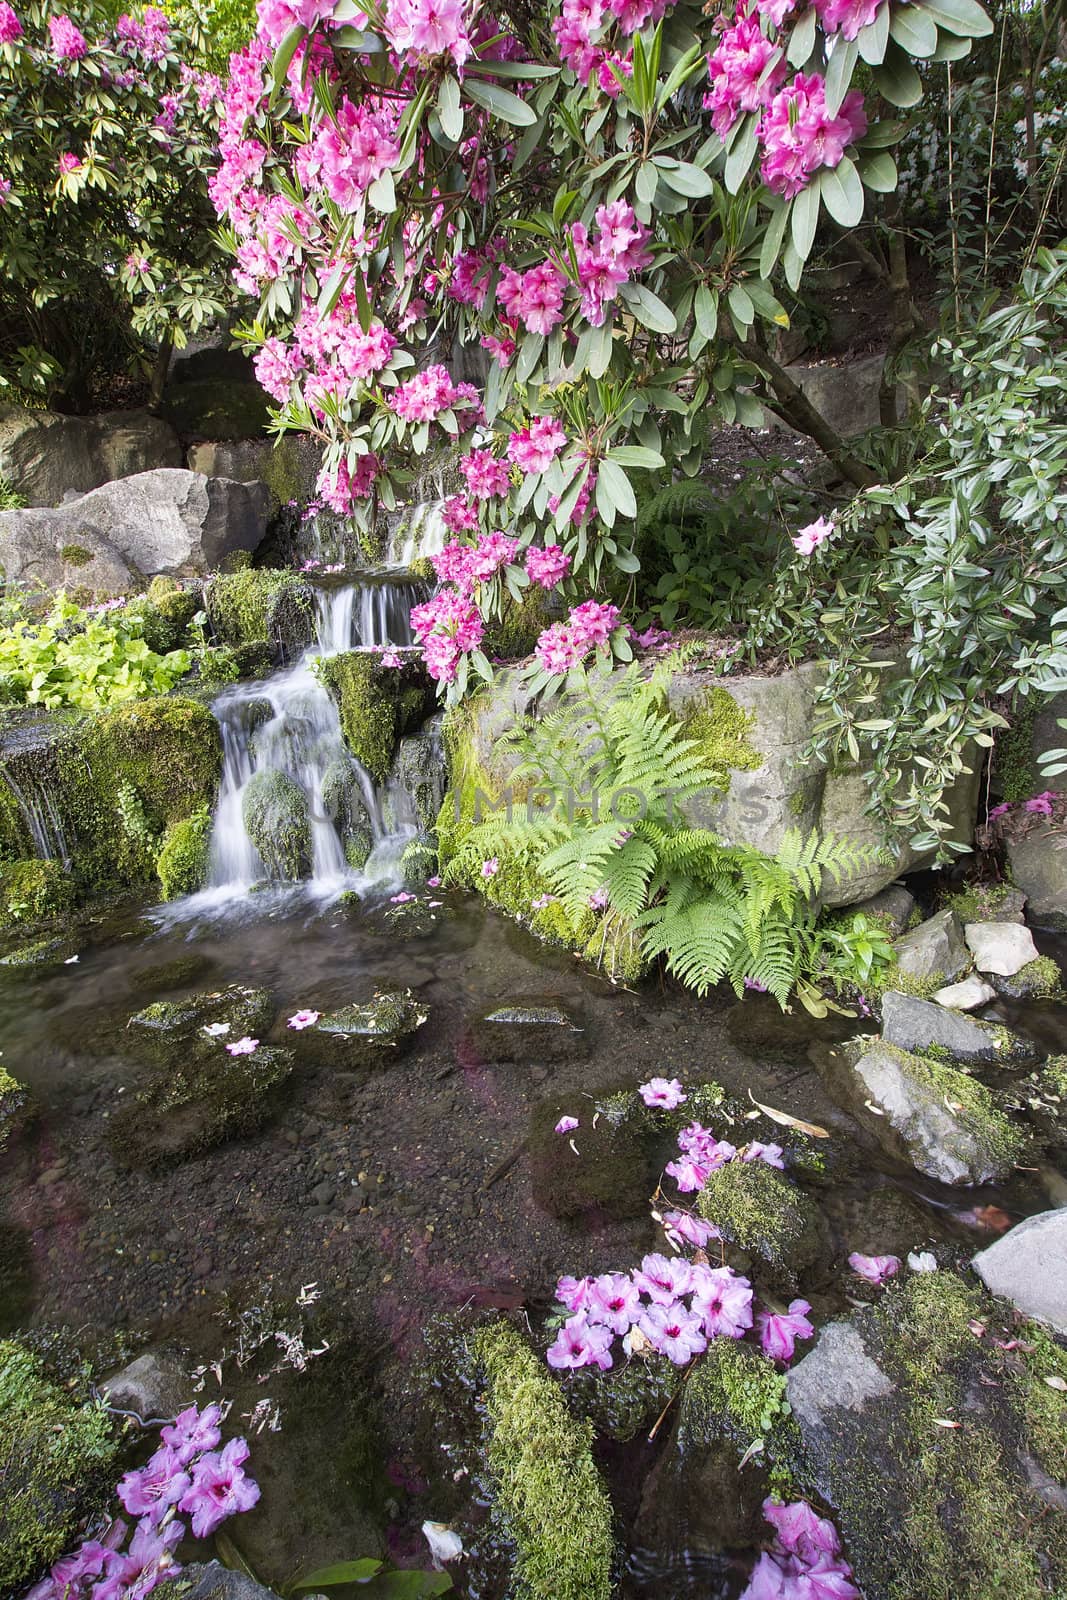 Rhododendron Pink Flowers Blooming Over Waterfall at Crystal Springs Garden in Spring